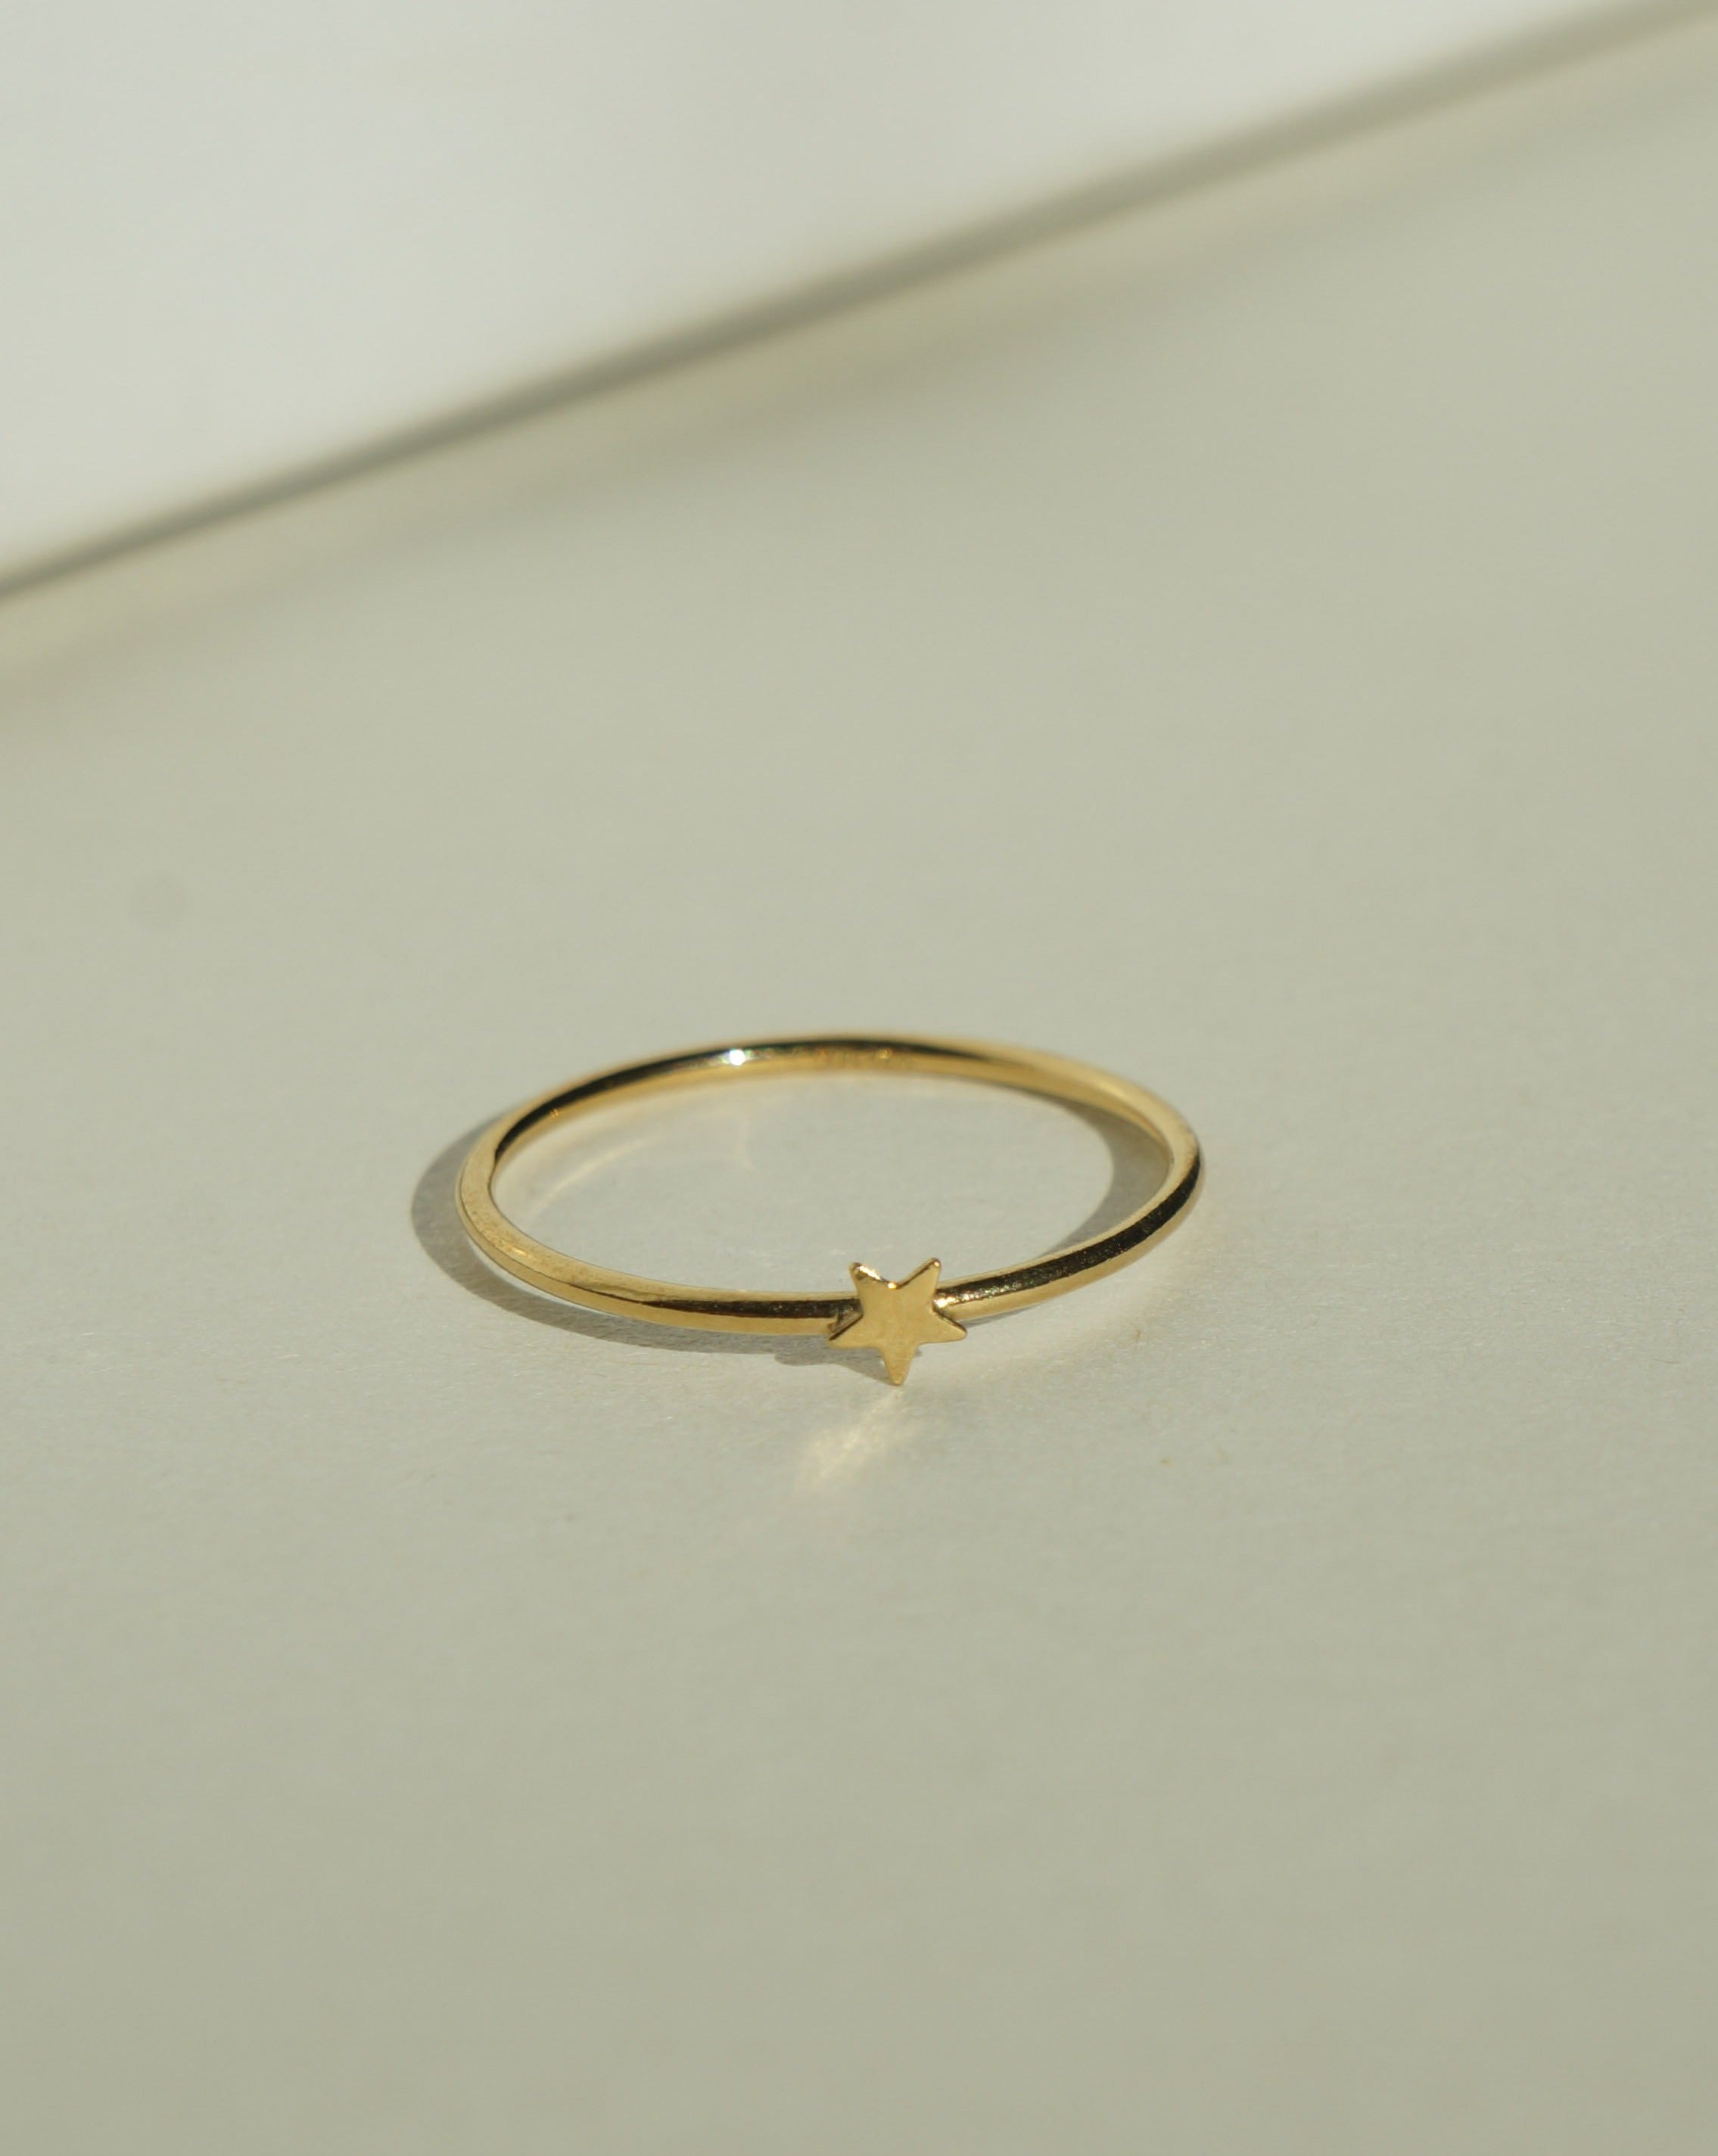 Star Ring by KOZAKH. A 1mm band, crafted in 14K Gold Filled, featuring a star shape design.